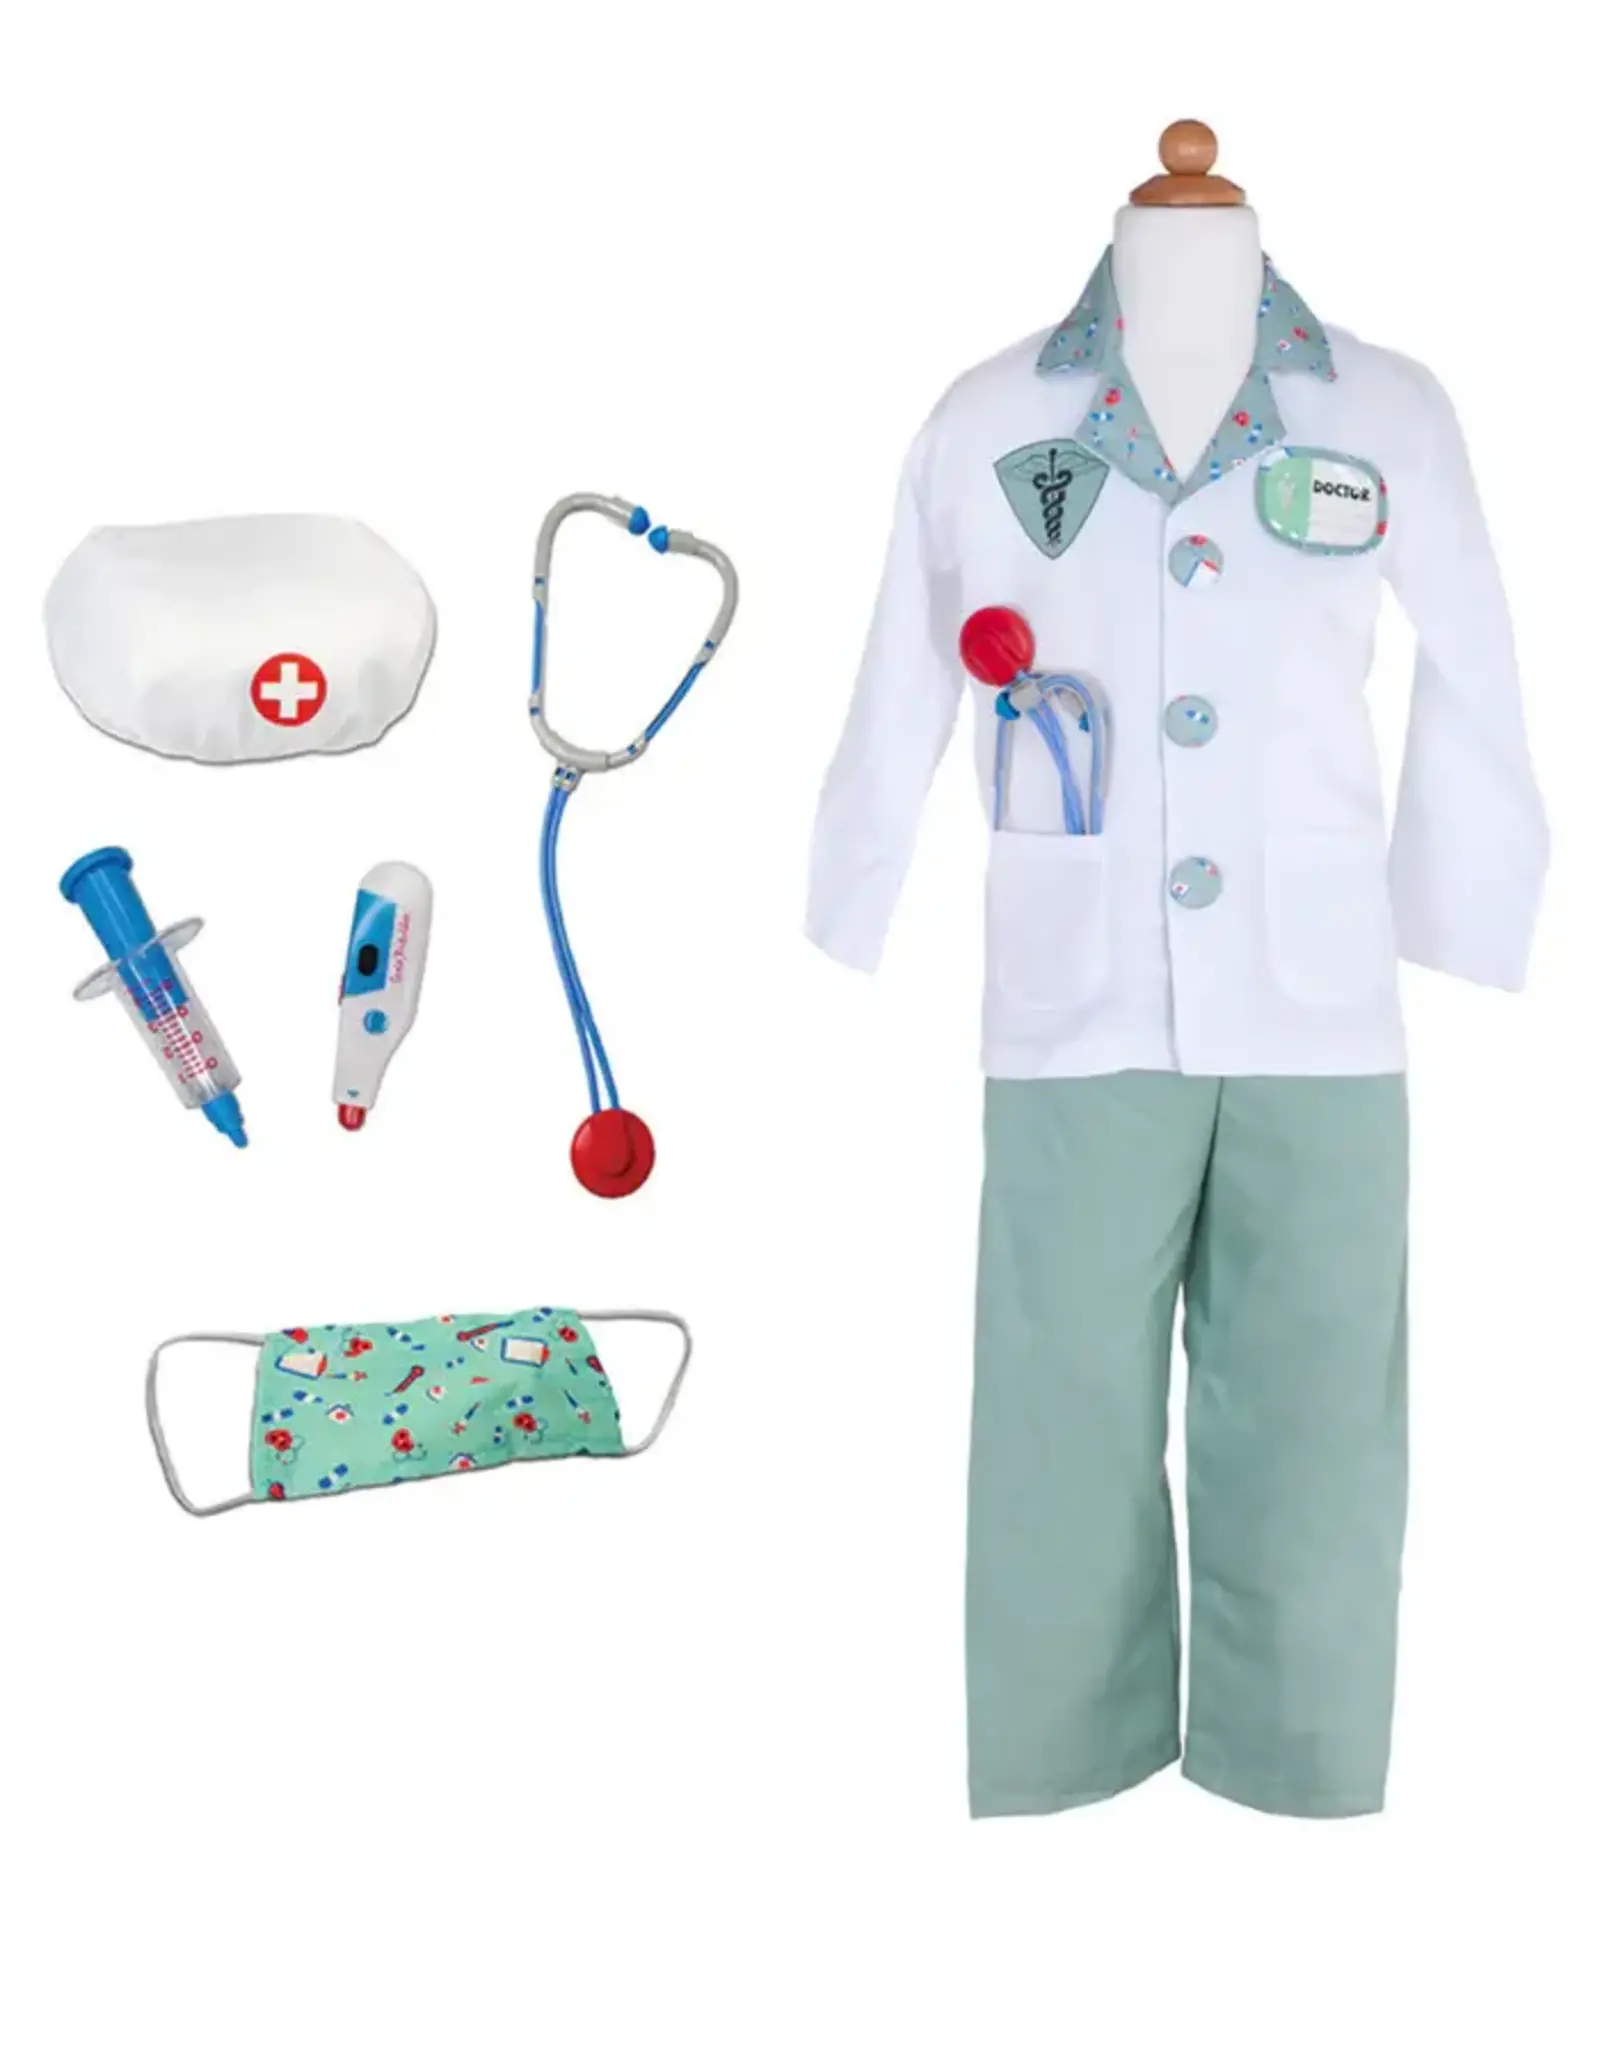 Creative Education Green Doctor Set, Includes 6 Accessories, Size 3-4